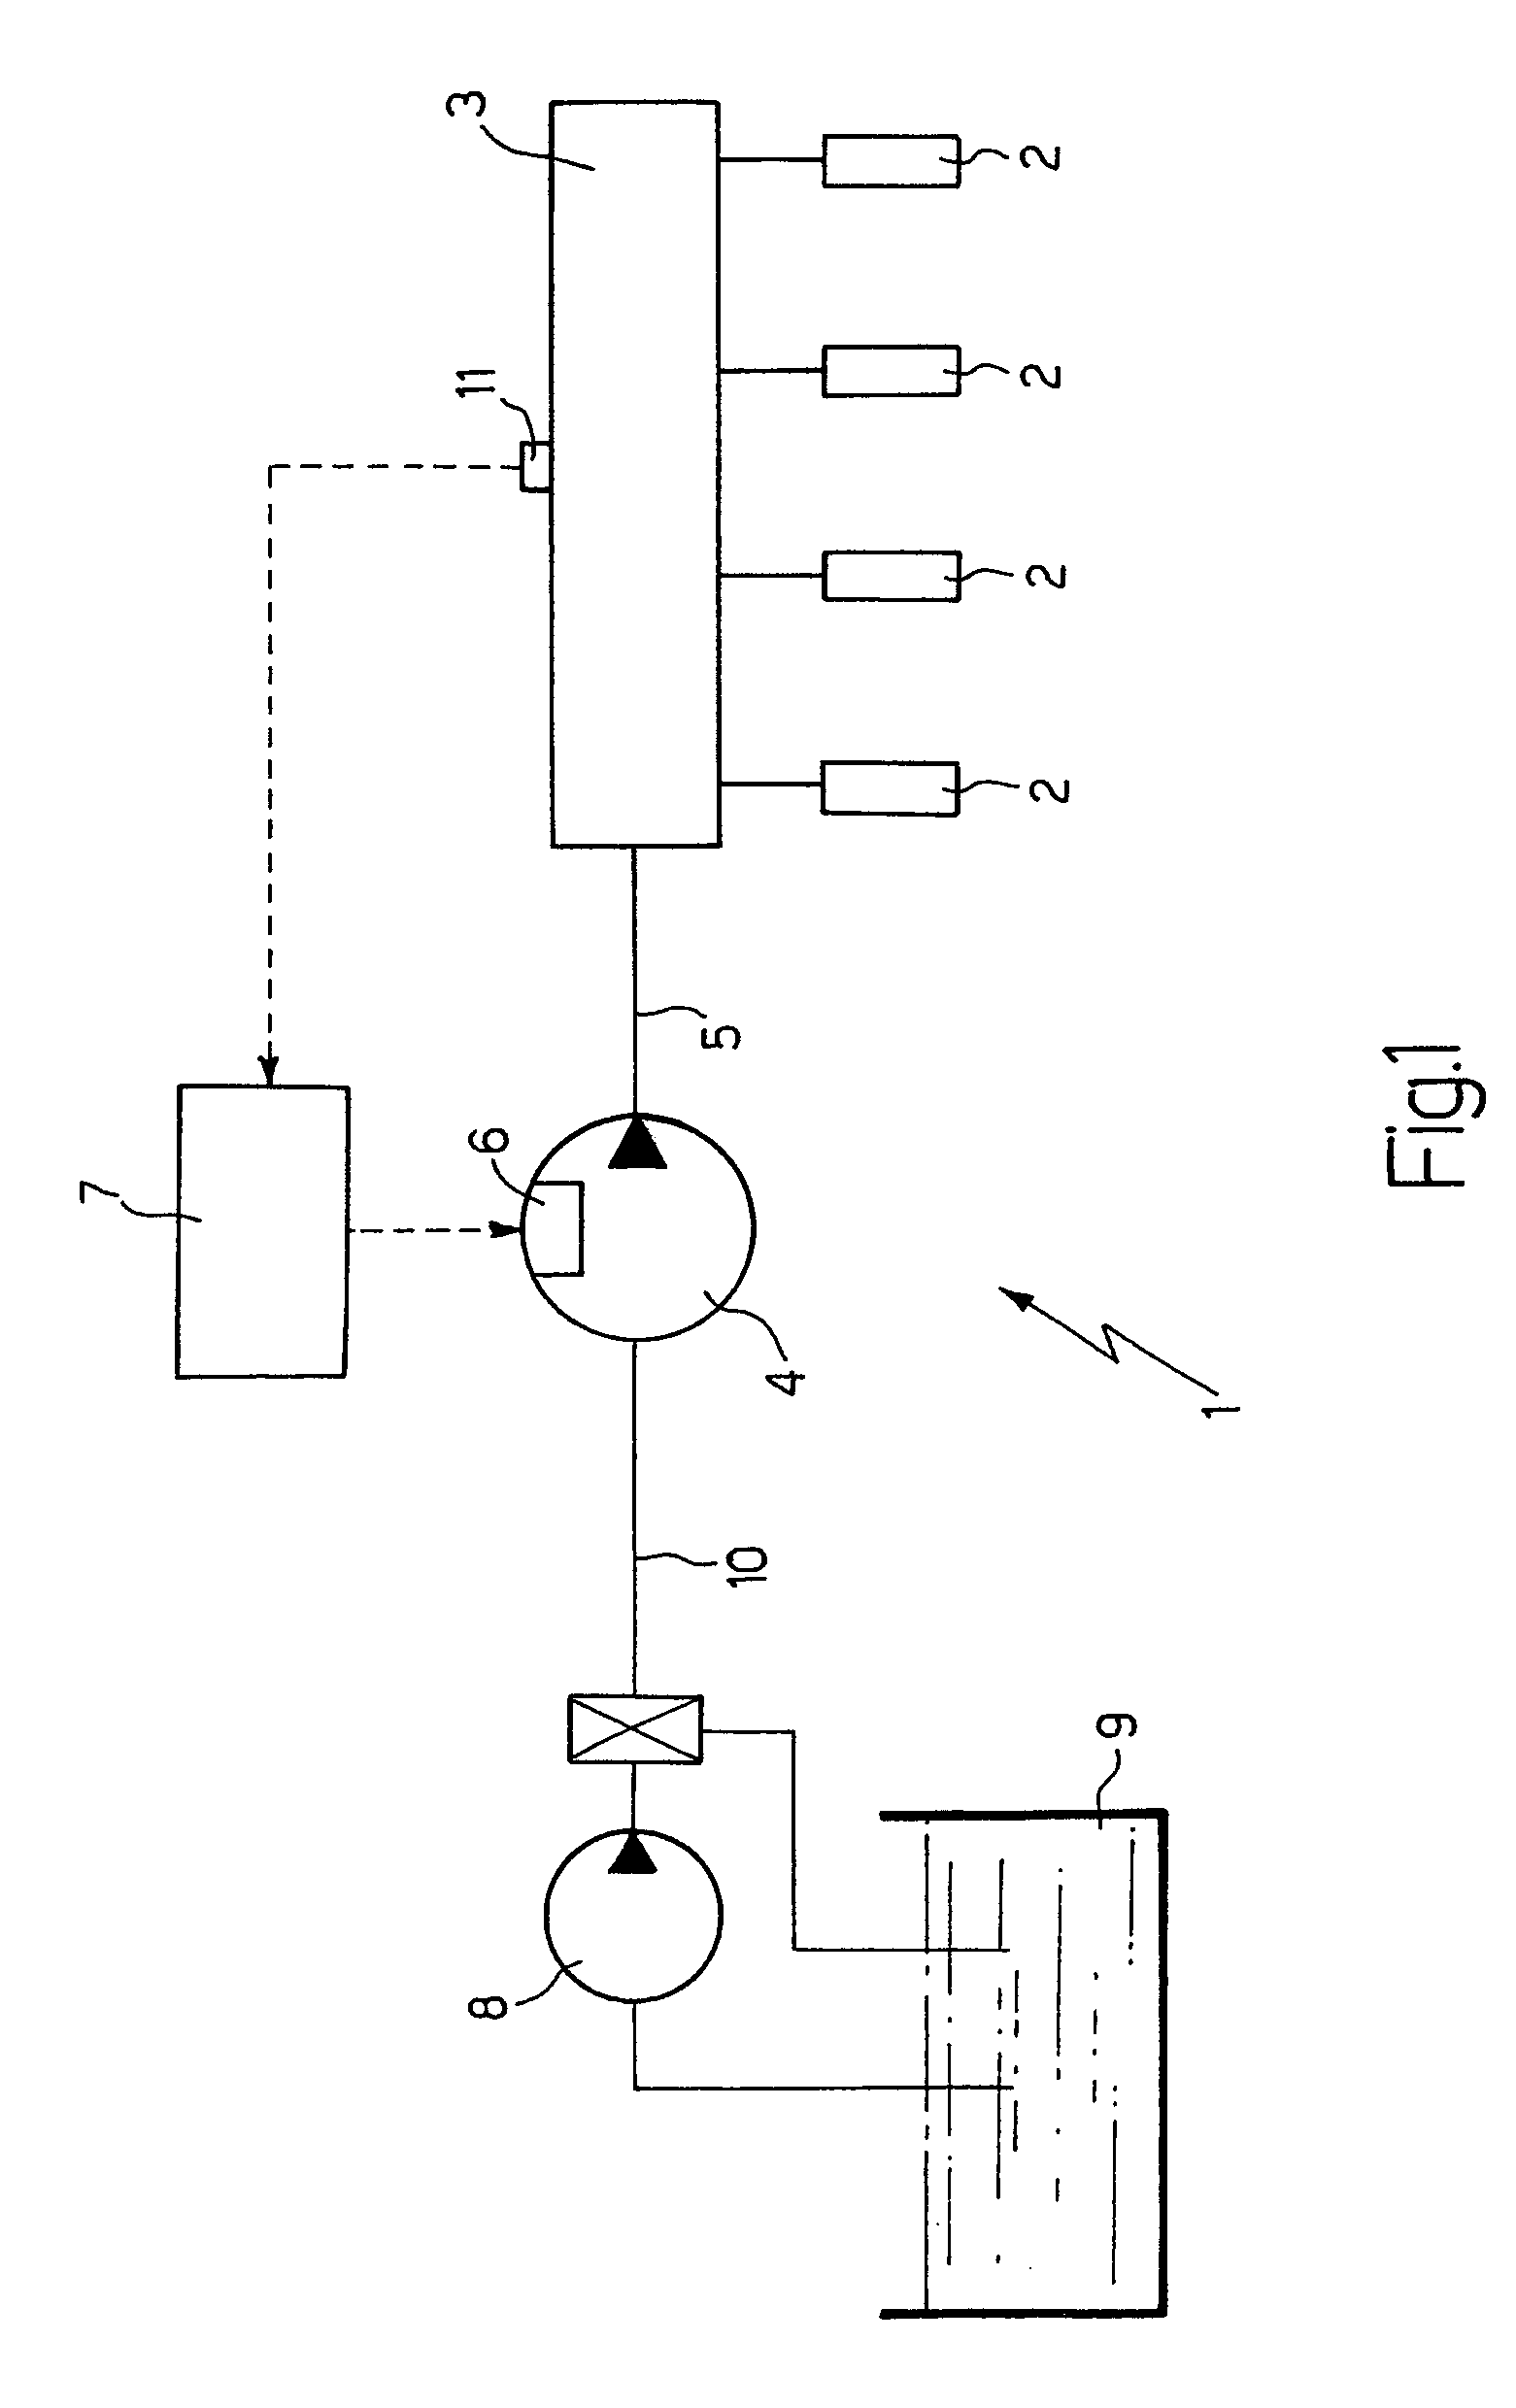 Method and system for the direct injection of fuel into an internal combustion engine